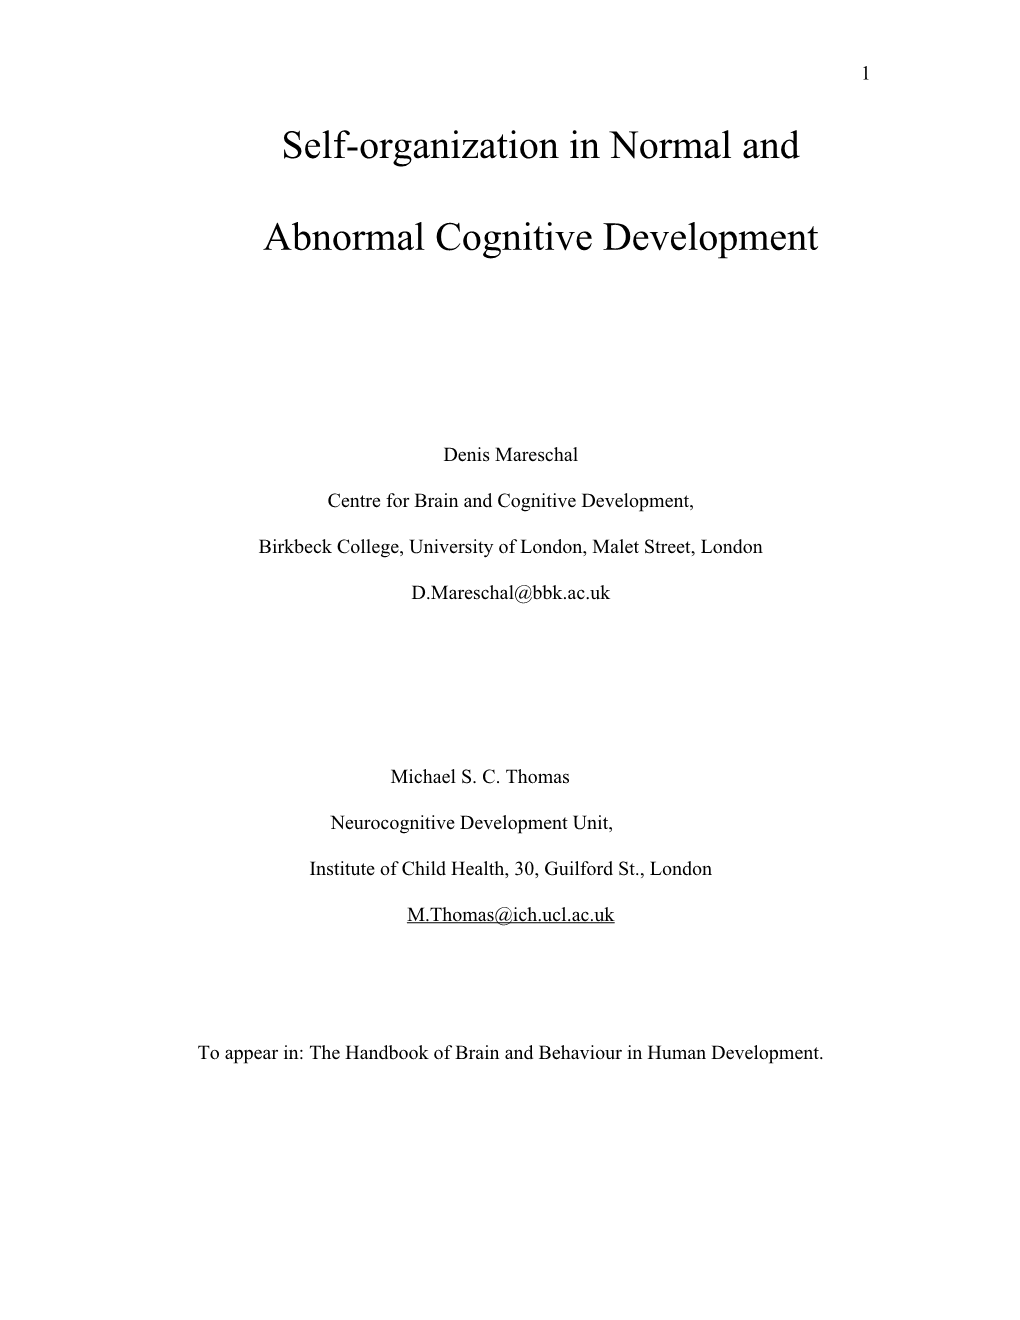 Self-Organization in Normal and Abnormal Cognitive Development